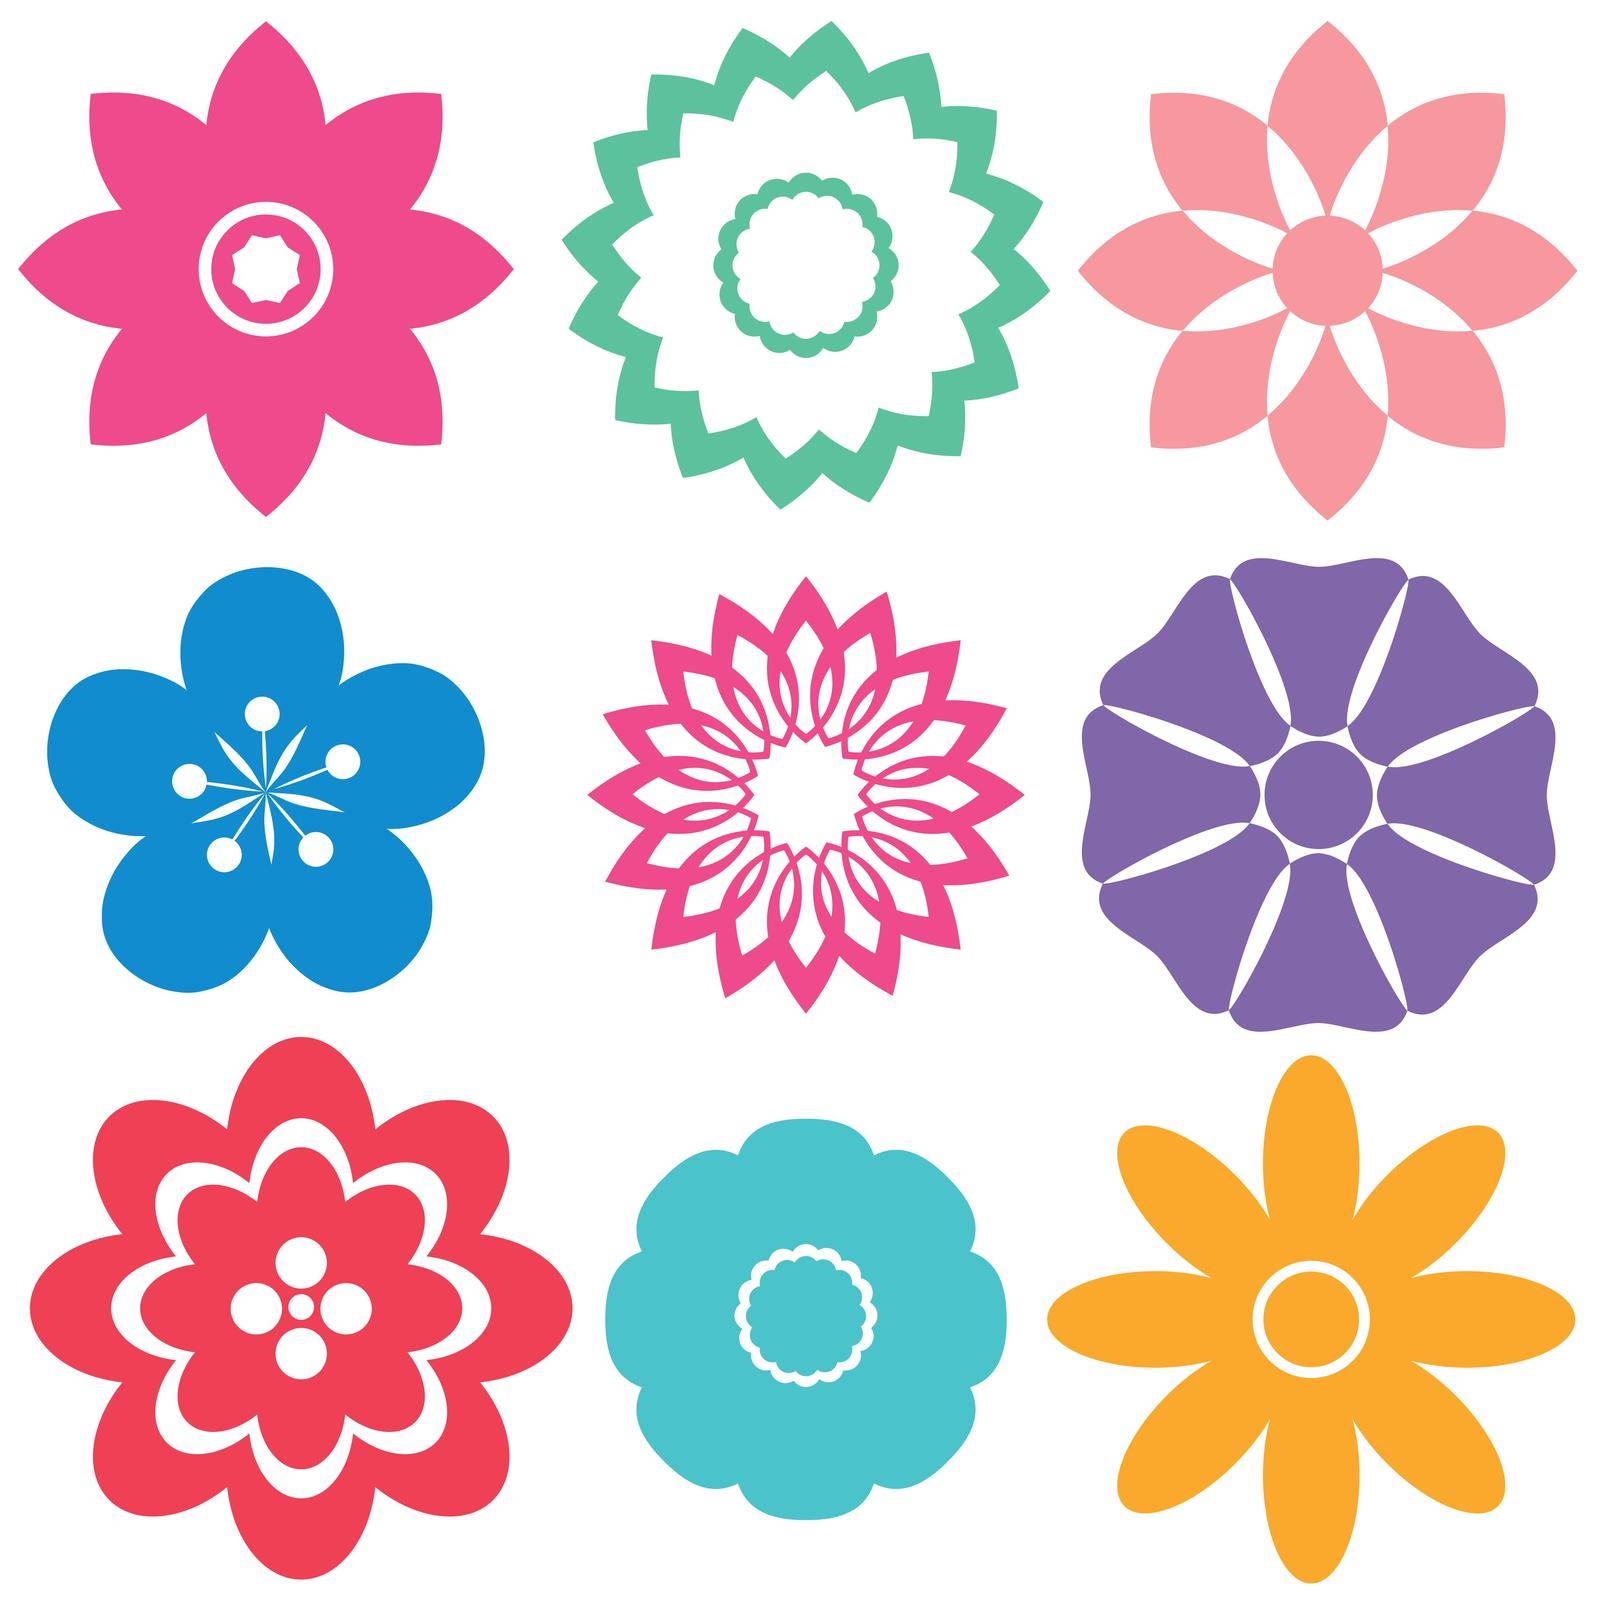 Colorful floral templates on a white background